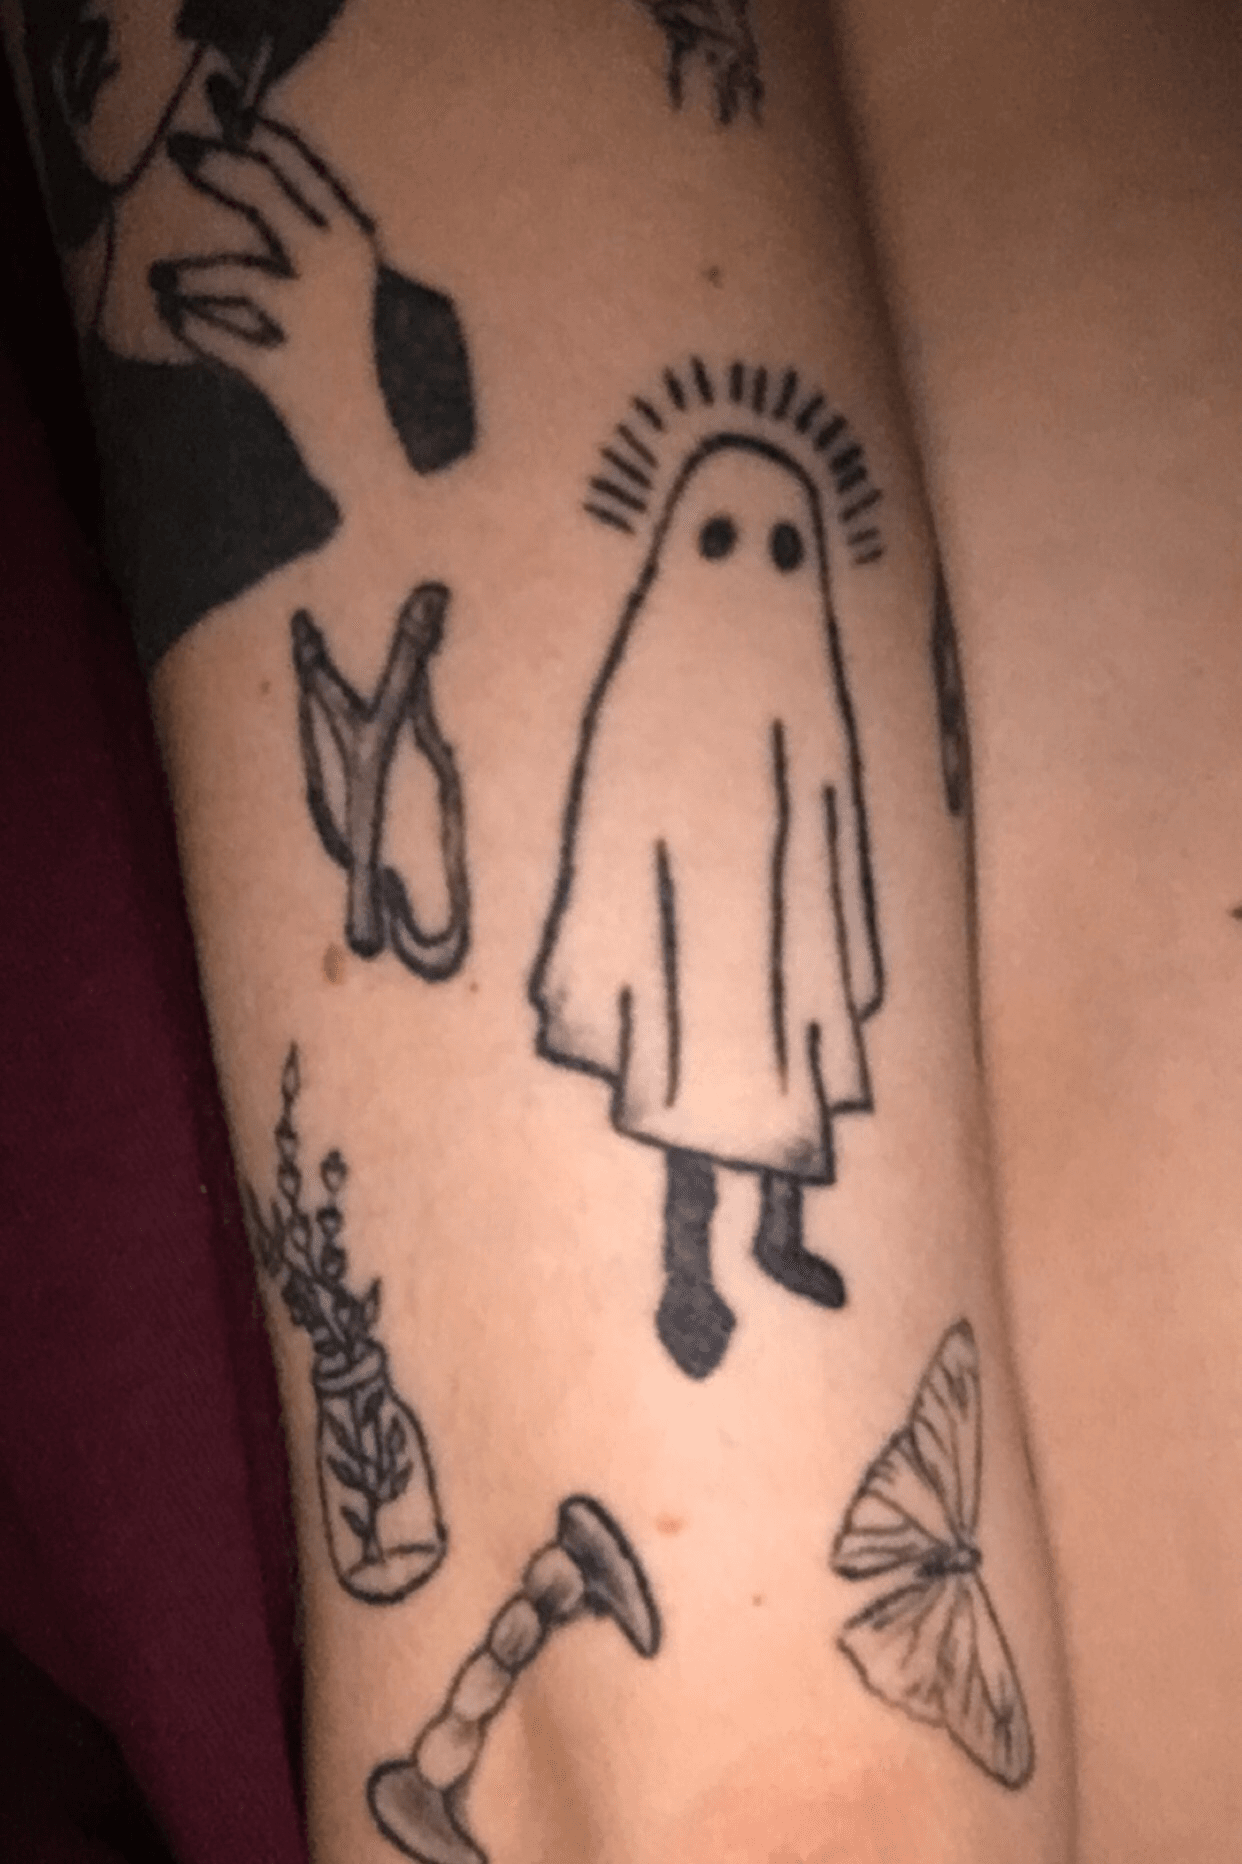 Phoebe Bridgers shows off tattoo of the sword and note gifted to her by fan